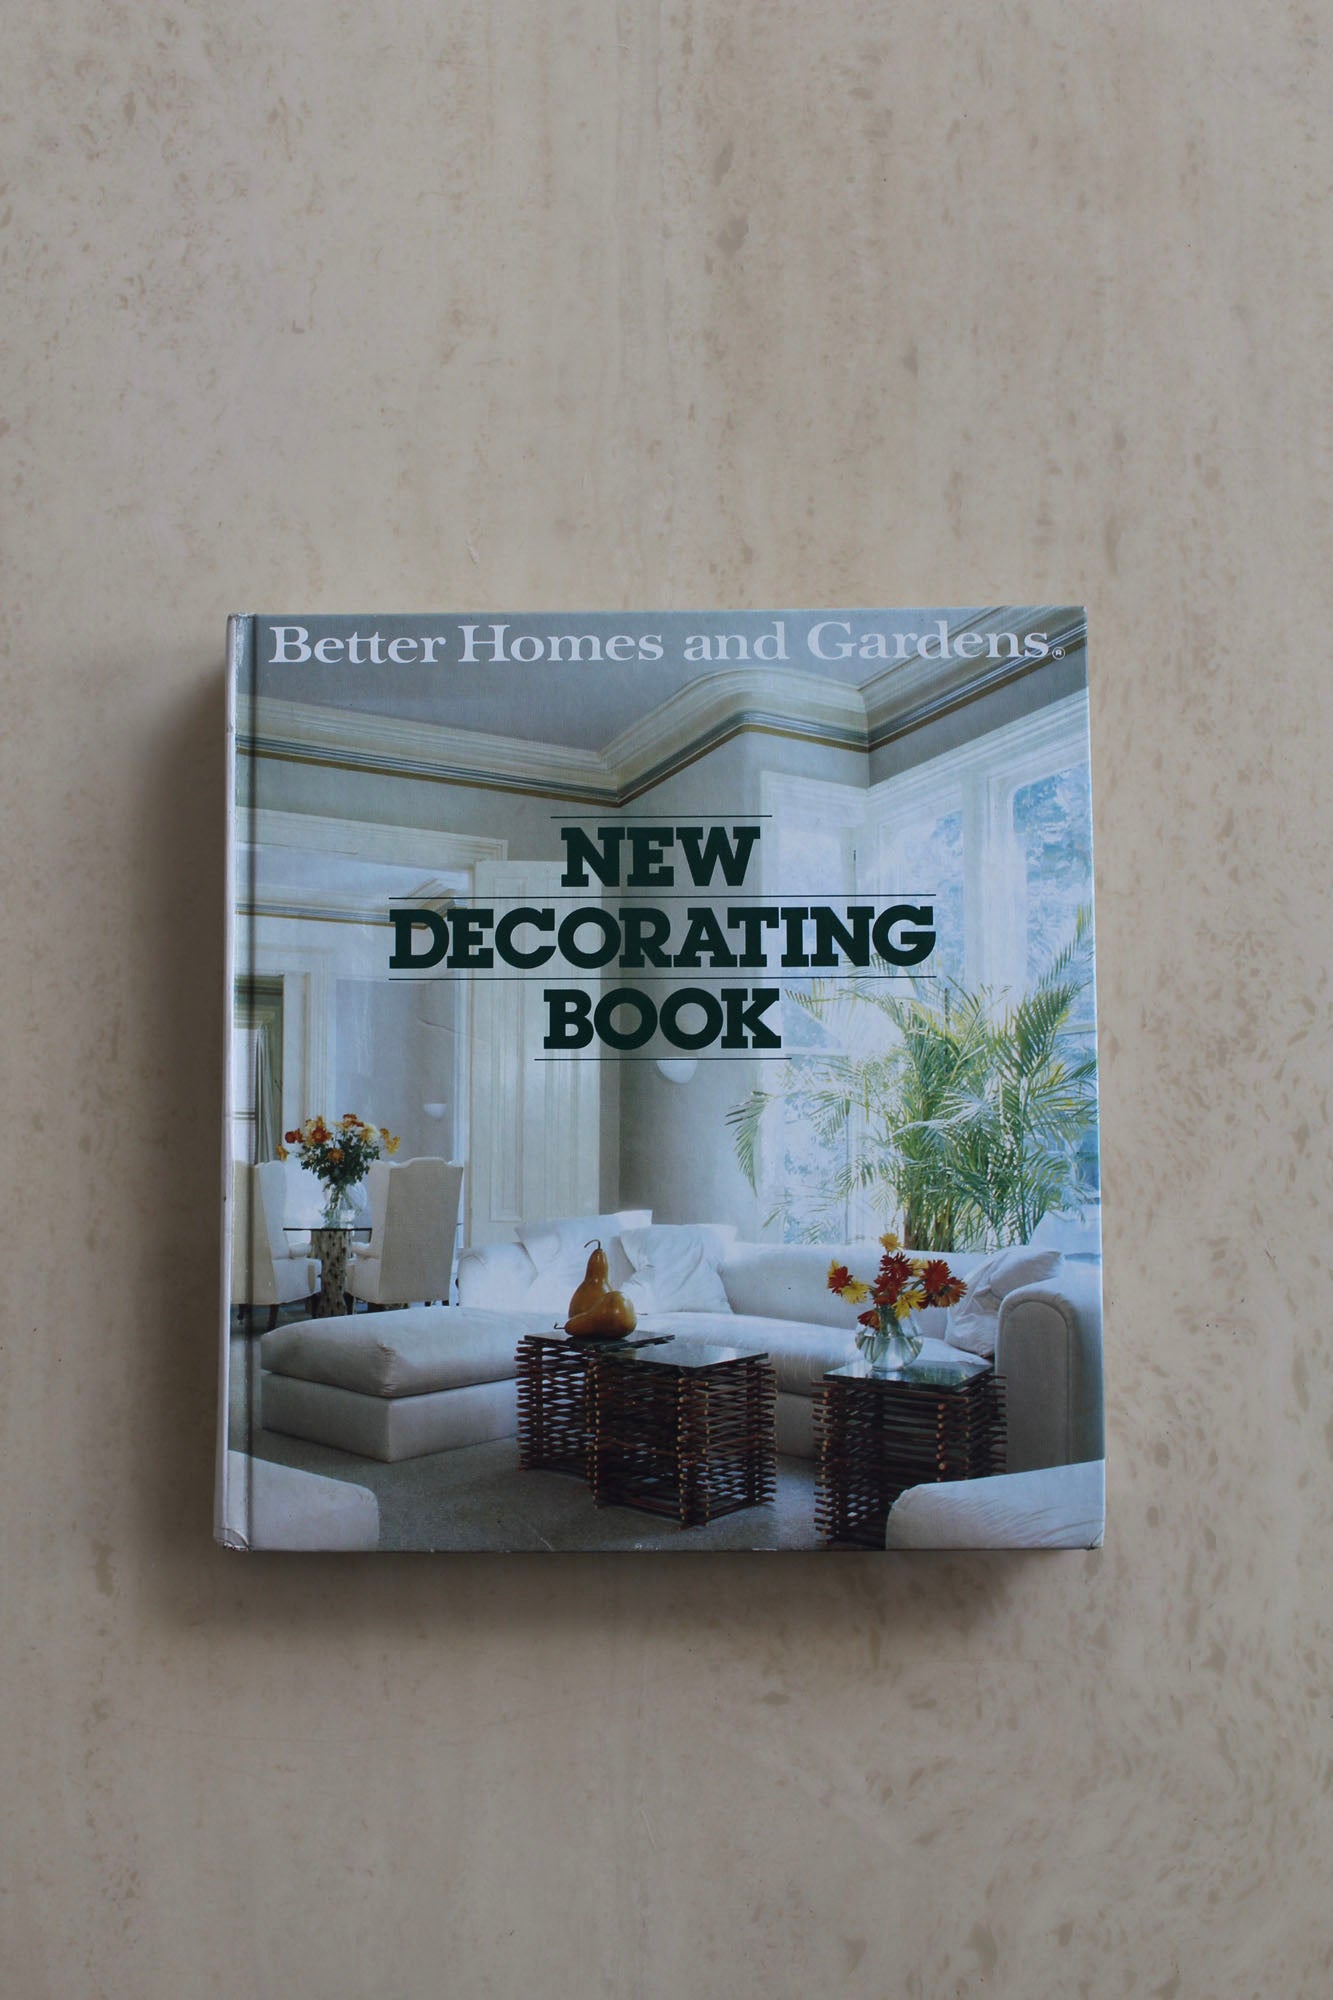 New Decorating Book By Better Homes and Gardens, 1981.